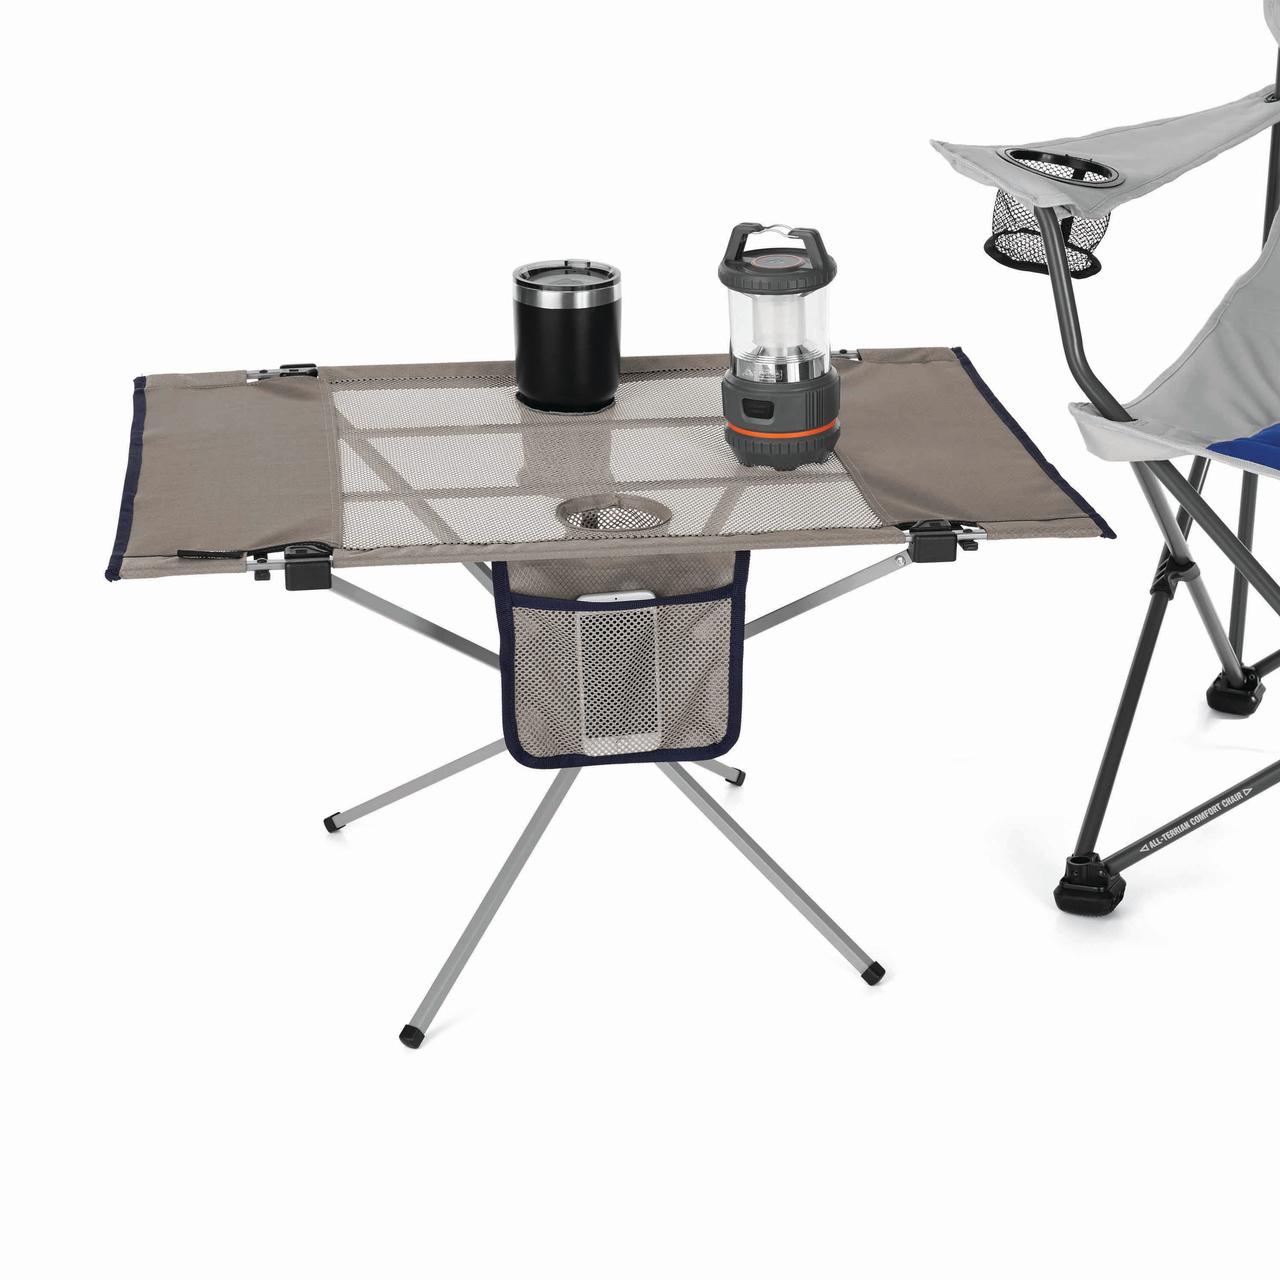 Ozark Trail Portable High-Tension Travel Table, Open Size 20.5 in x 31.5 in x 18.1 in - image 2 of 8